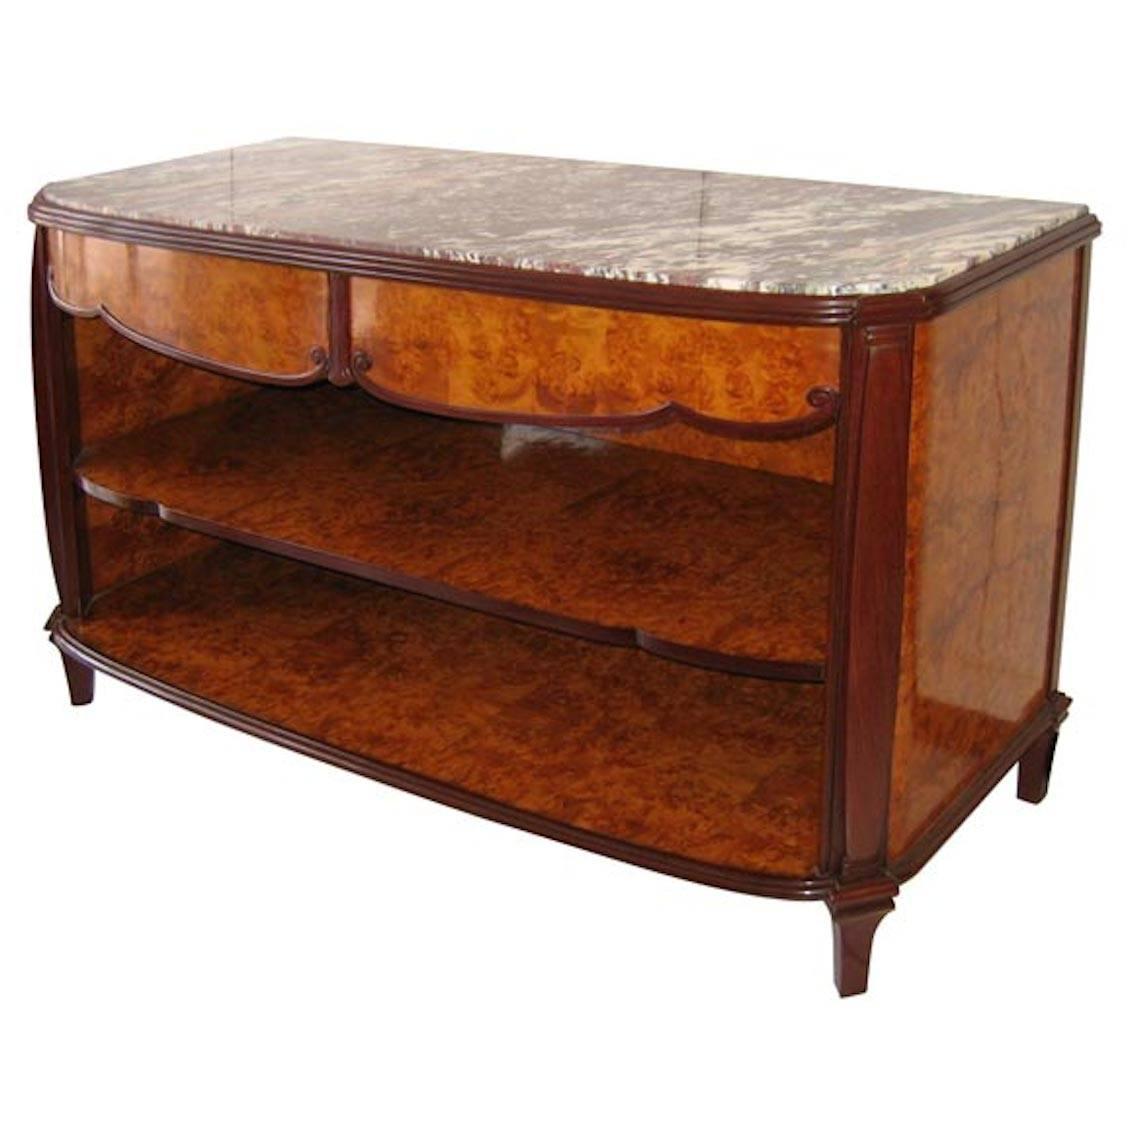 Maurice Dufrene Wood Storage Cabinet, circa 1925 For Sale